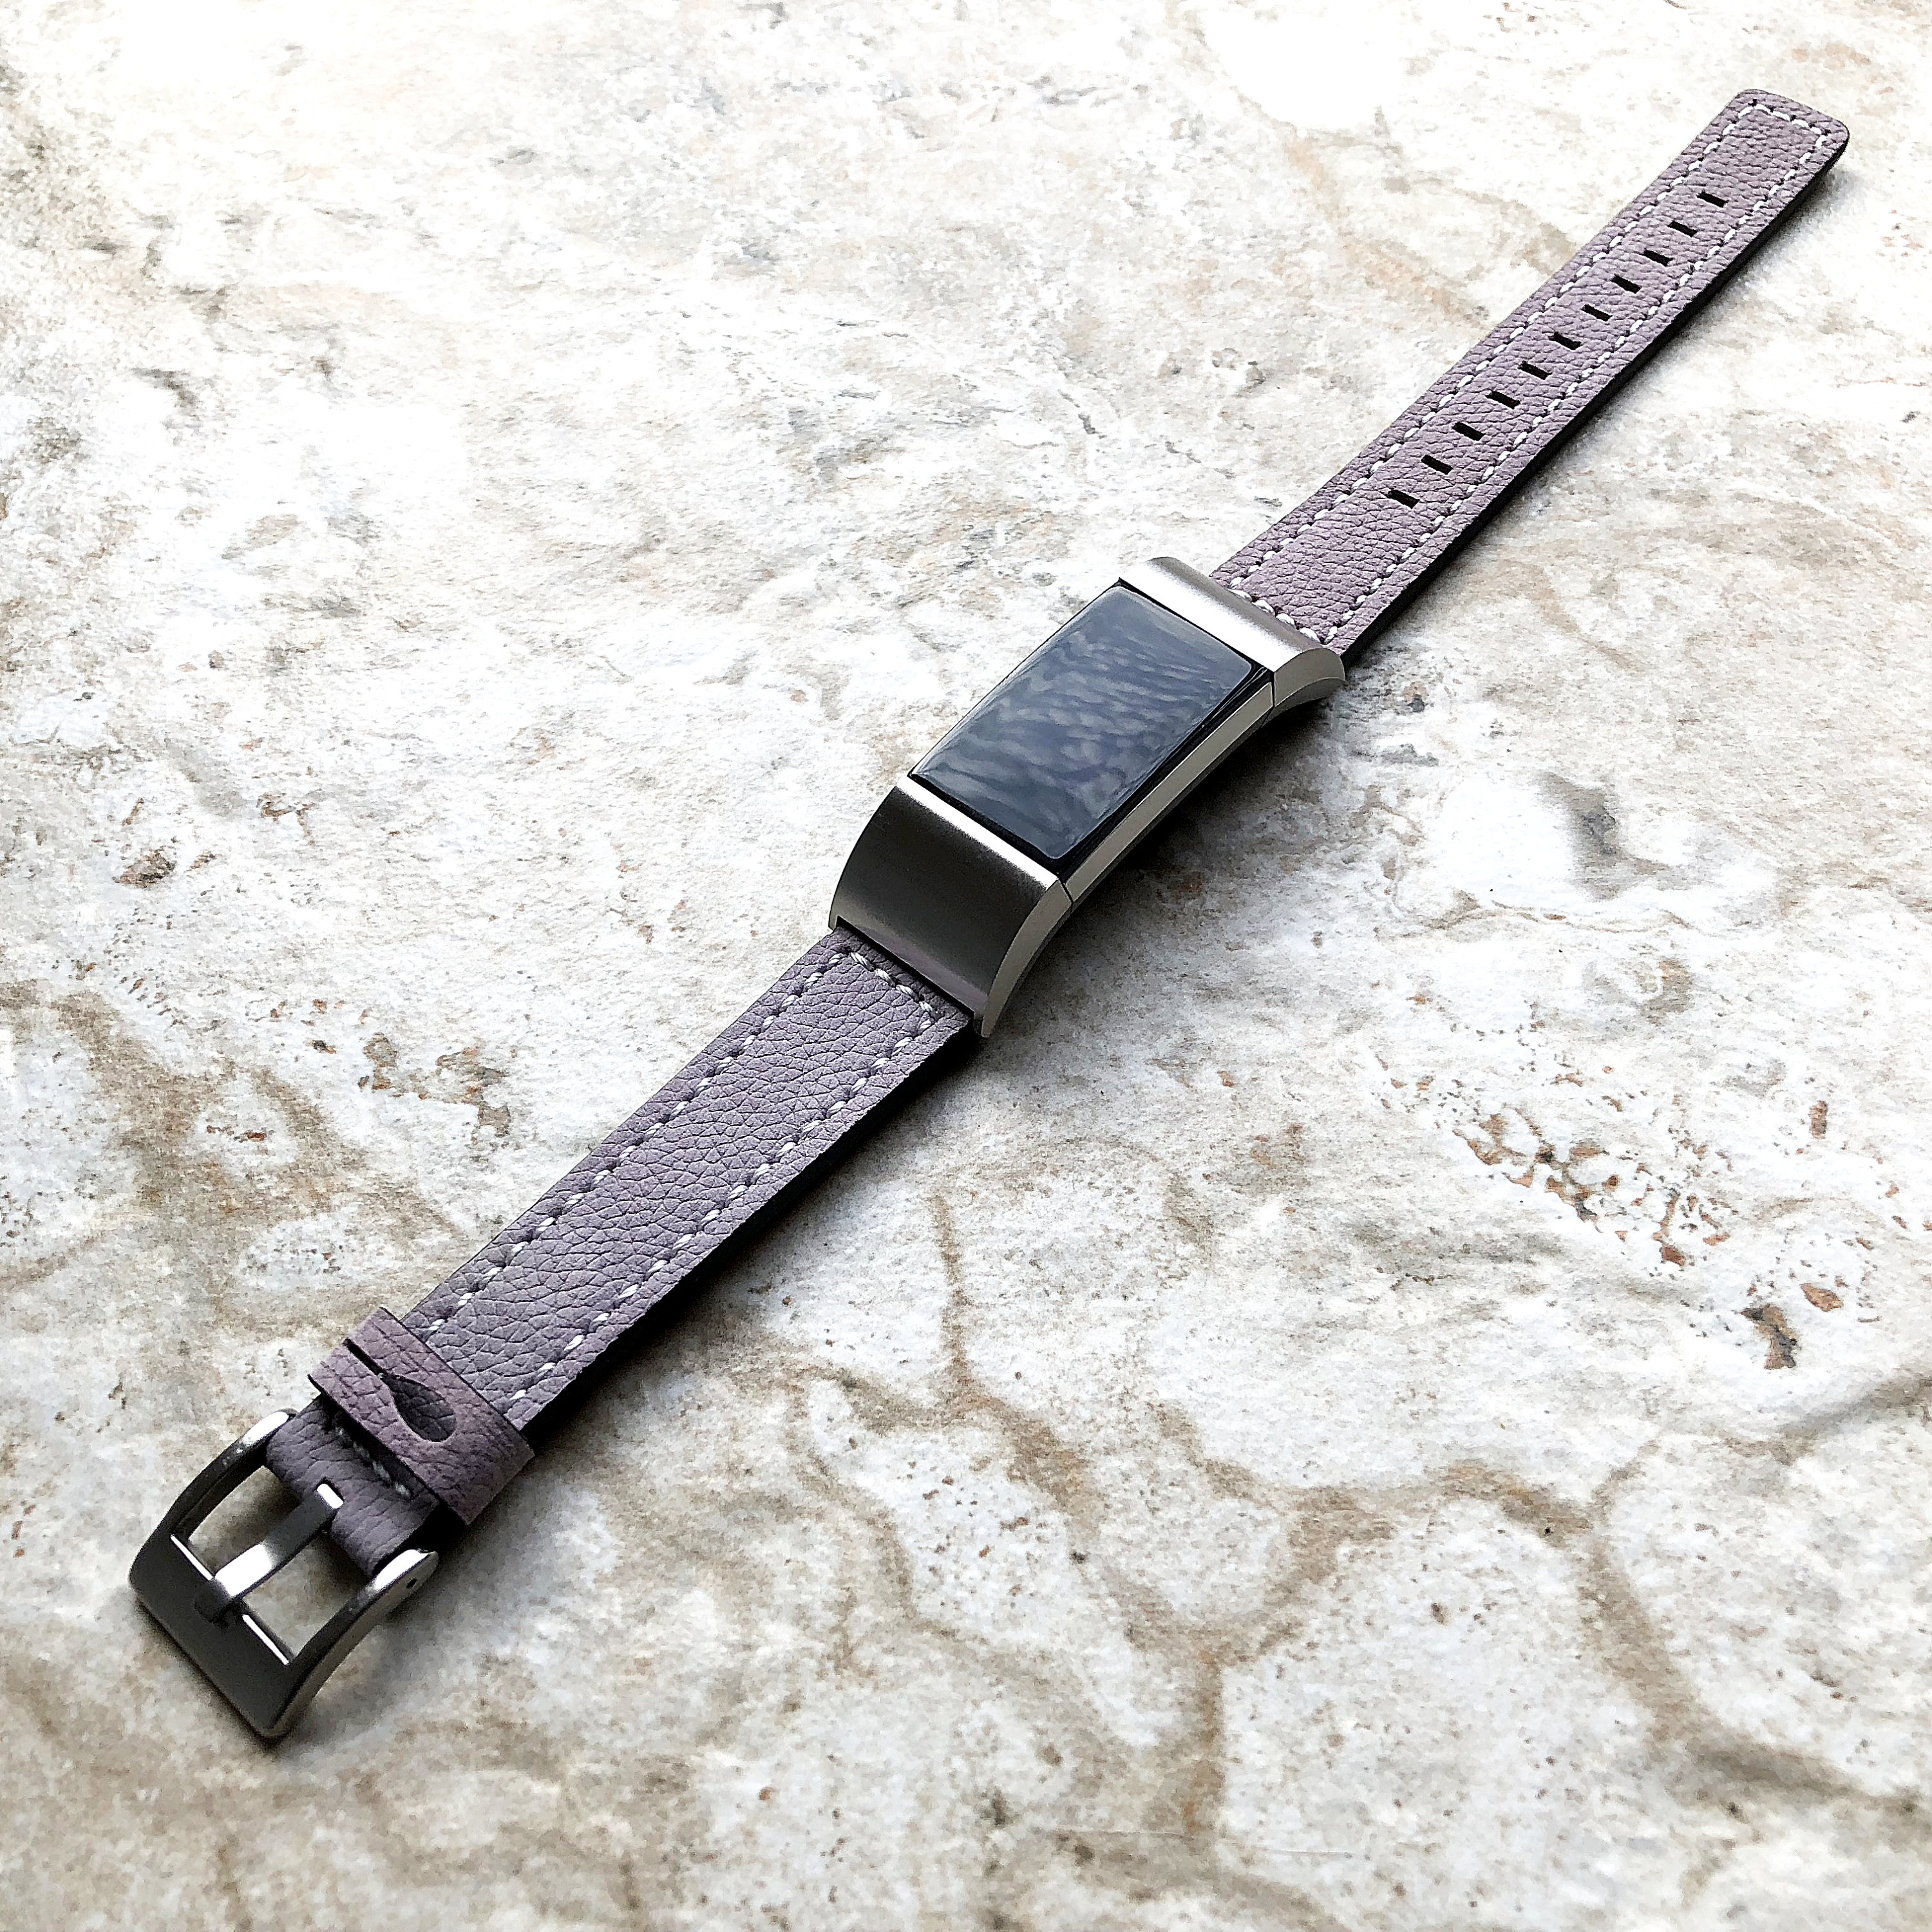 leather strap fitbit charge 3